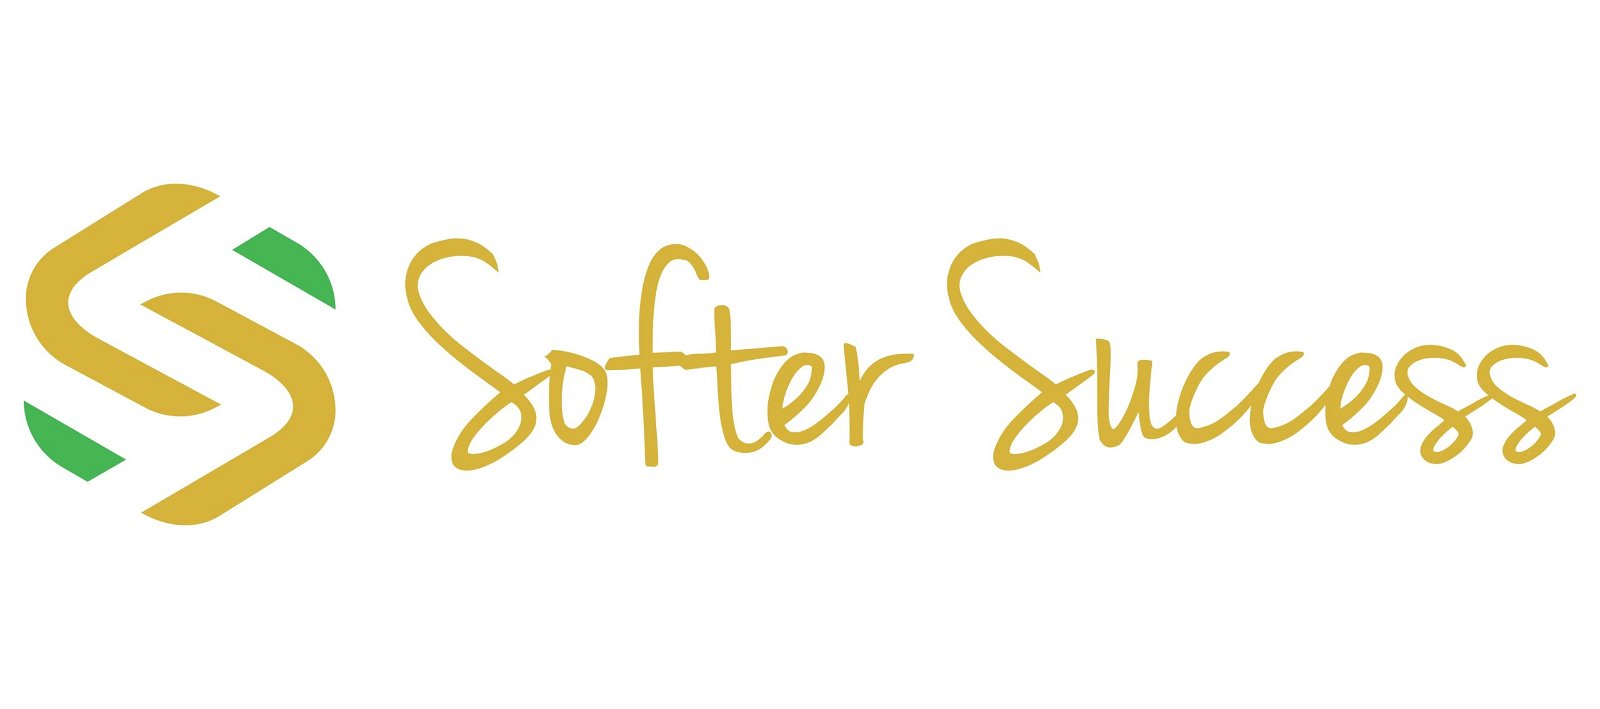 Founder and CEO at Softer Success